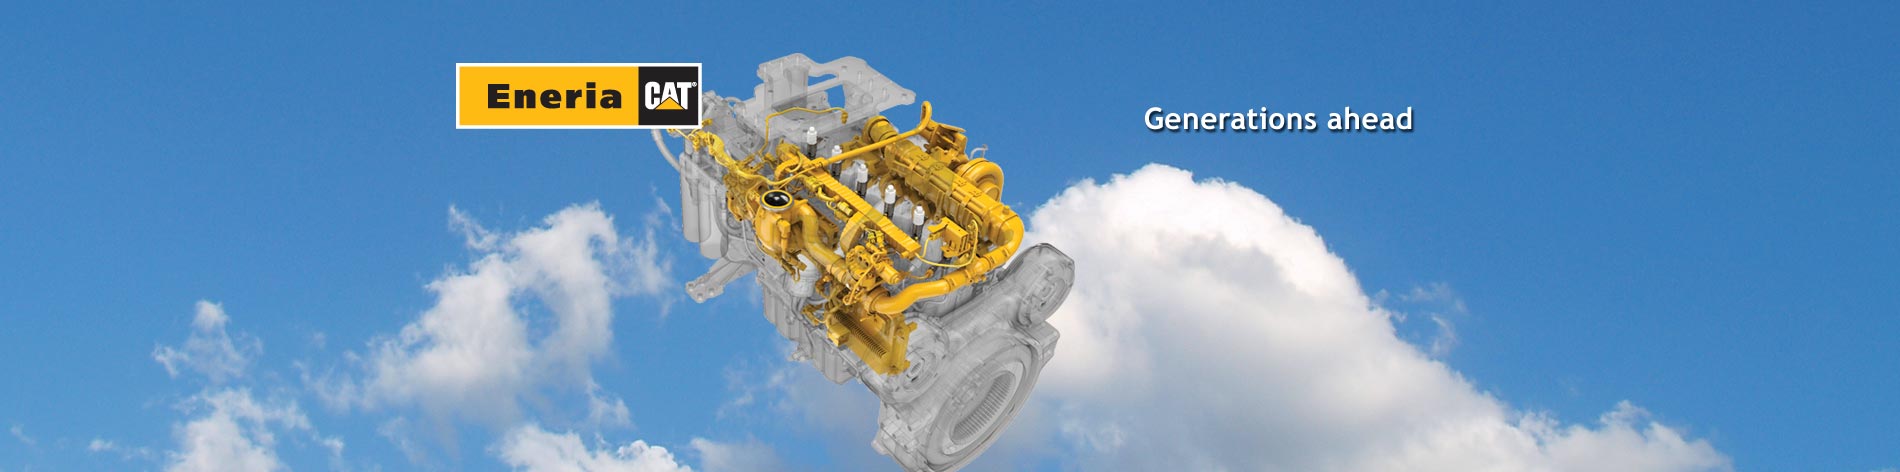 Building on decades of innovation and expertise in the field of diesel engines, Caterpillar is ahead of the game and offers the best technology.